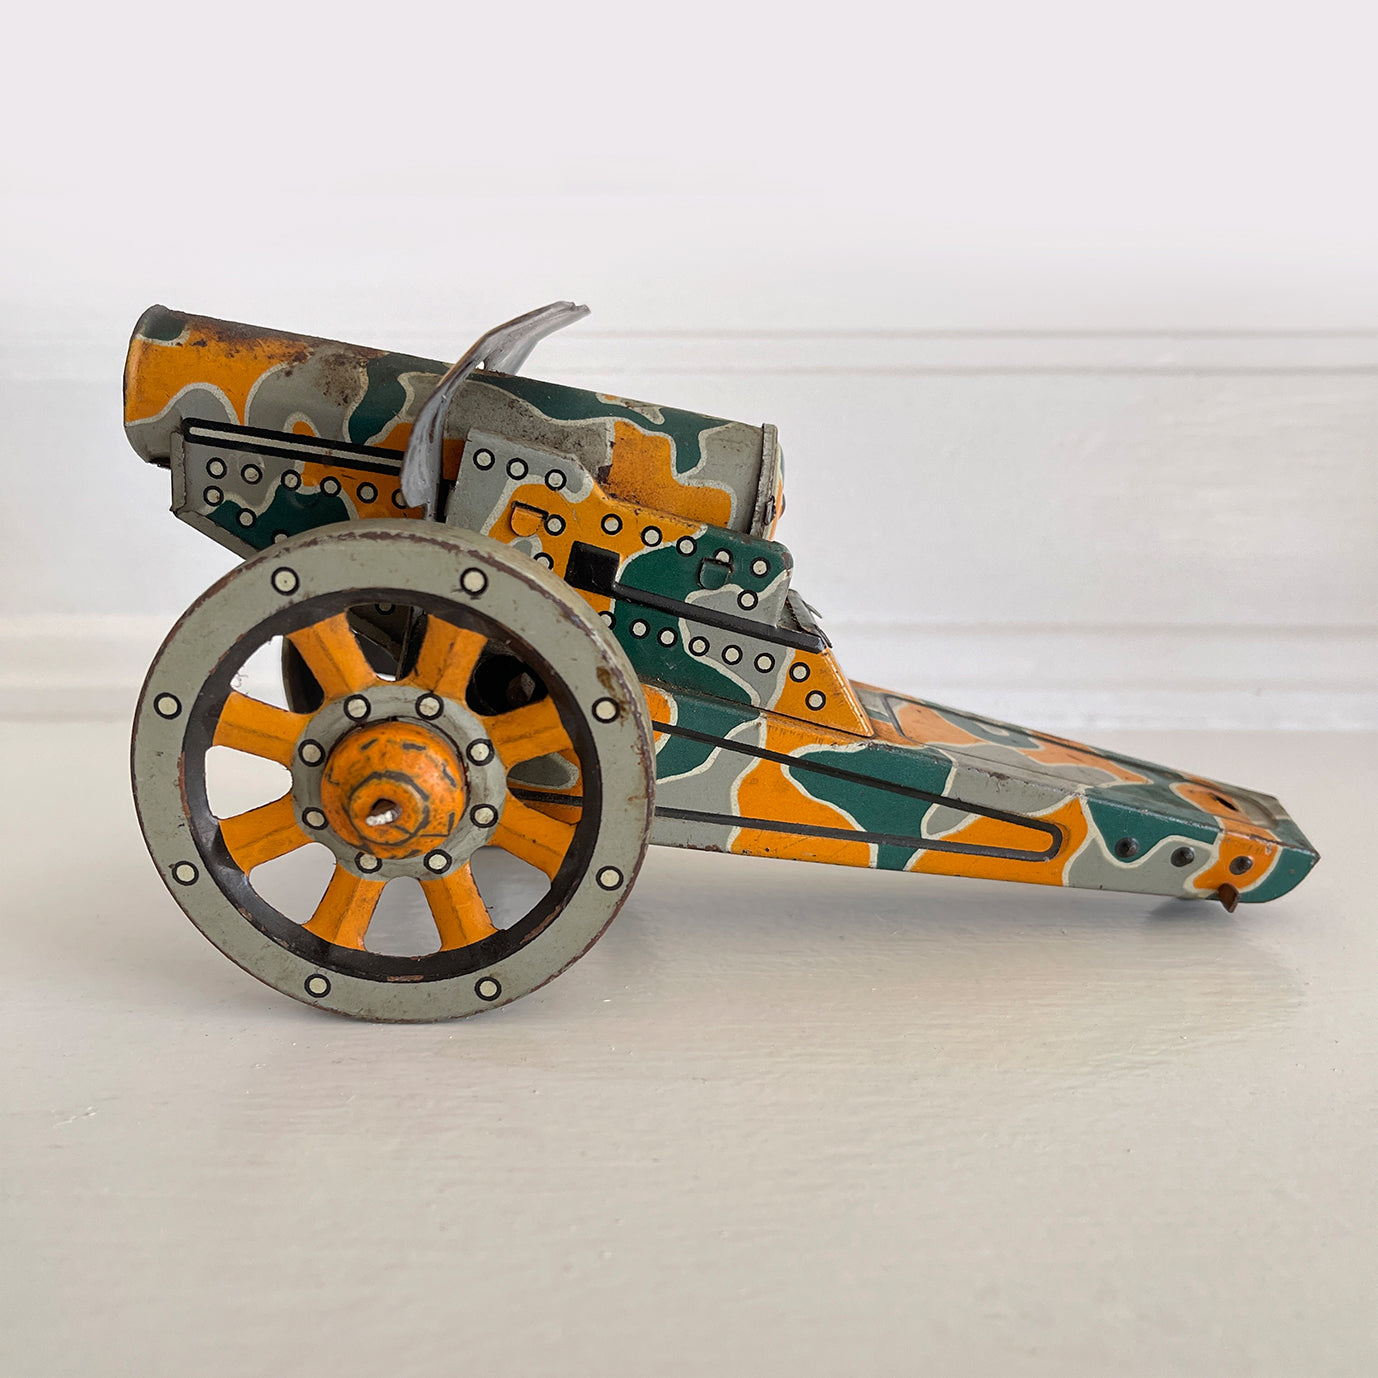 A Pre-War 1930s SHOWA tin-plate clockwork Cannon. It has a clockwork movement, that when wound moves the cannon forward, shooting bright sparks out of the gun barrel then backwards again as if the gun has recoiled! - SHOP NOW - www.intovintage.co.uk